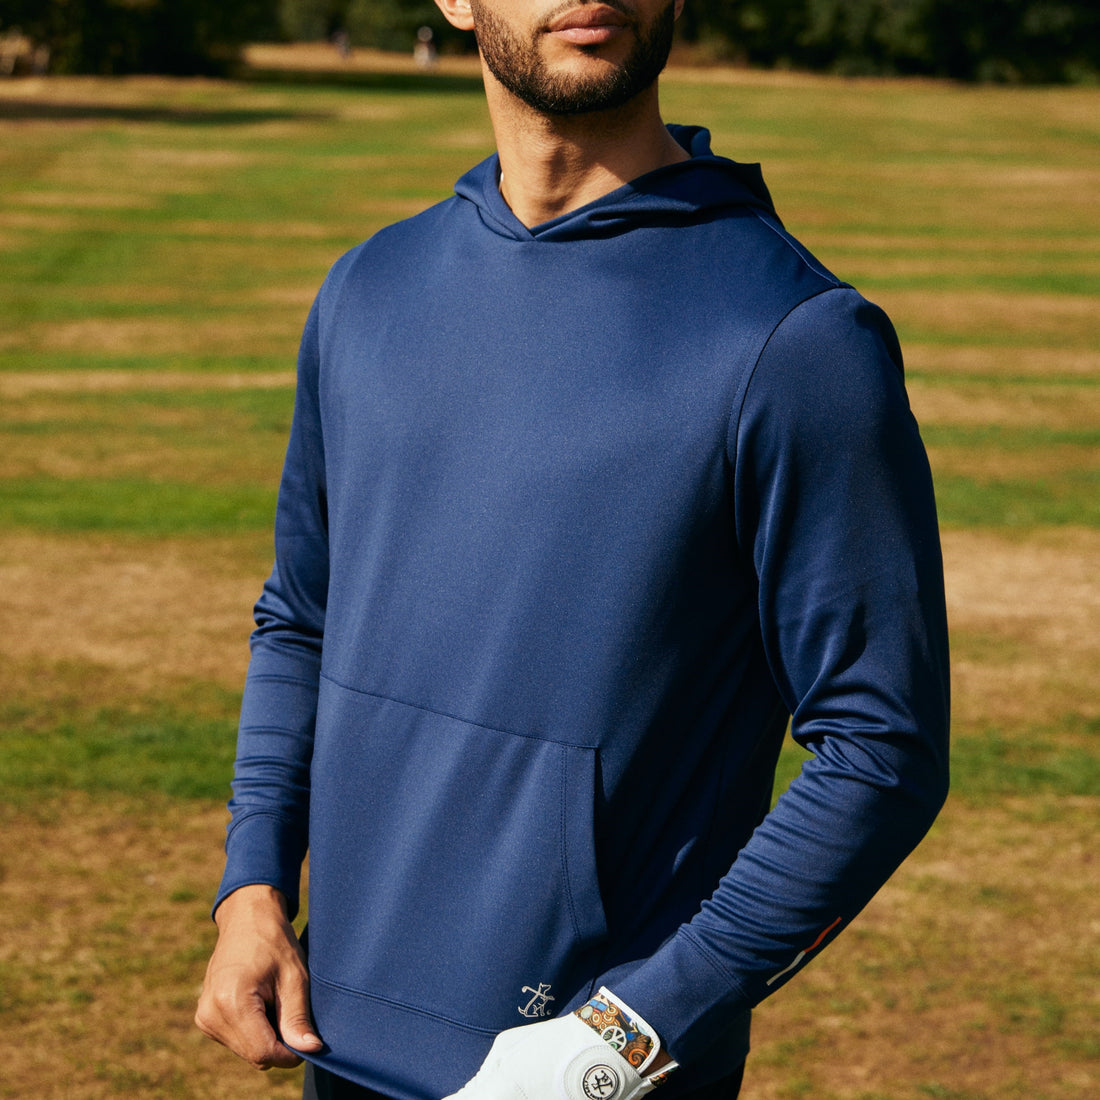 5 Reasons to wear a Golf Hoodie to Your Wardrobe